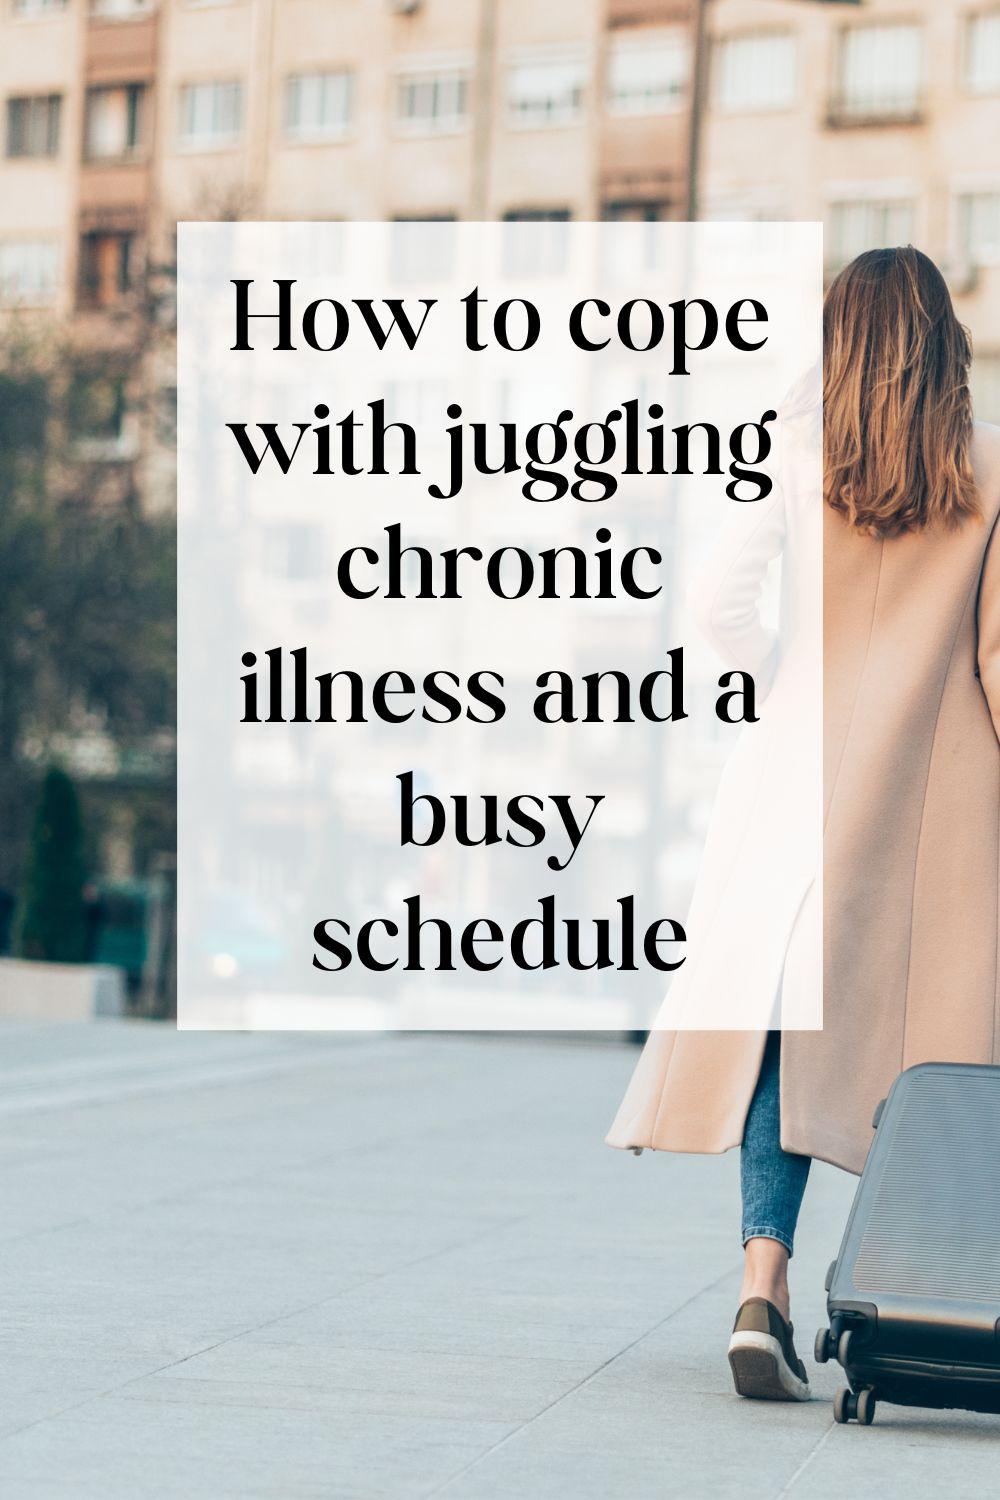 How to cope with juggling chronic illness and a busy schedule